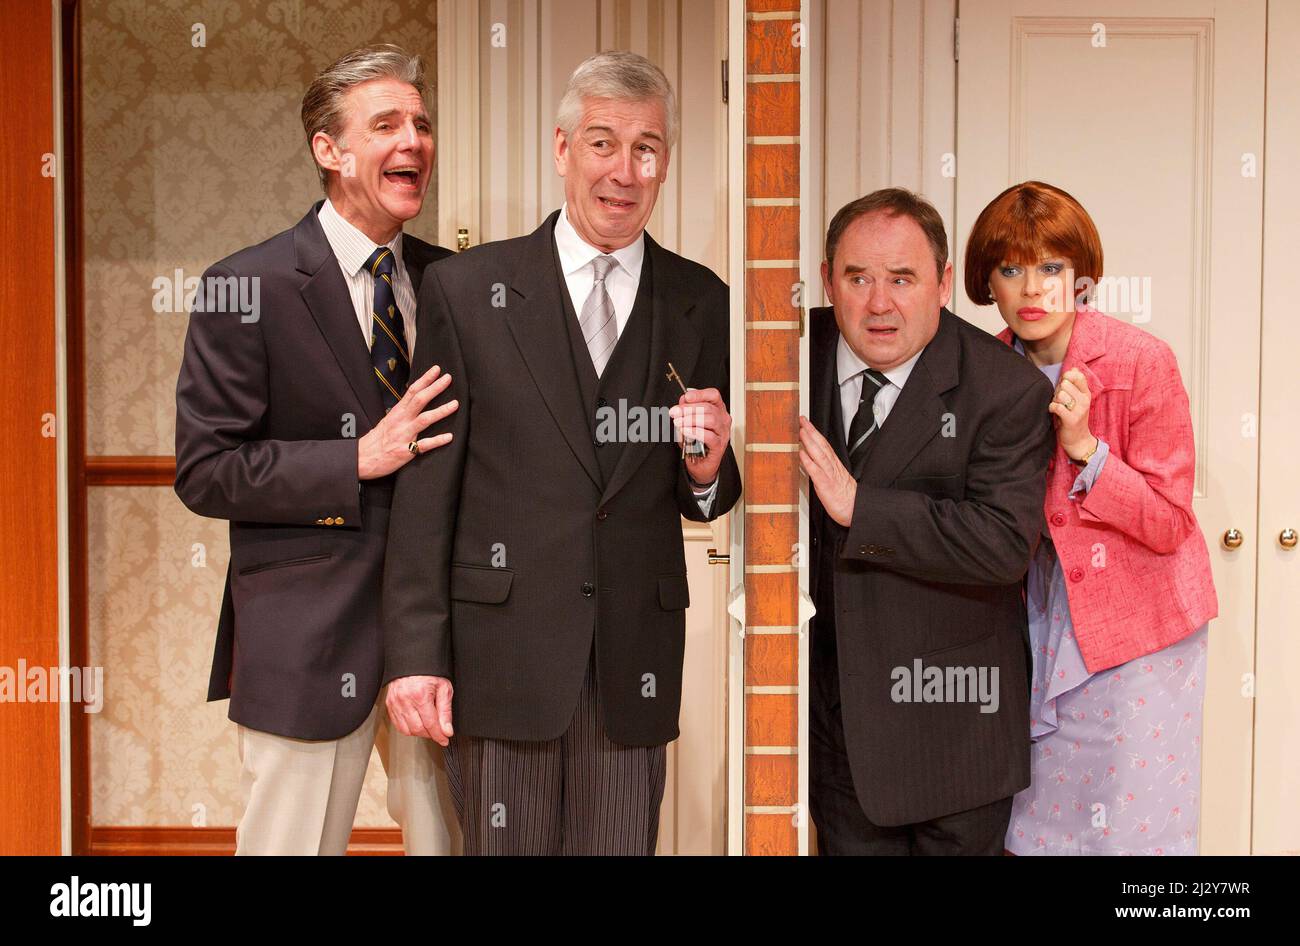 l-r: Michael Praed (Richard Willey), Jeffrey Holland (Manager), Nick Wilton (George Pigden), Kelly Adams (Jennifer Bristow) in TWO INTO ONE by Ray Cooney at the Menier Chocolate Factory, London SE1  19/03/2014  design: Julie Godfrey  lighting: Paul Anderson  director: Ray Cooney Stock Photo